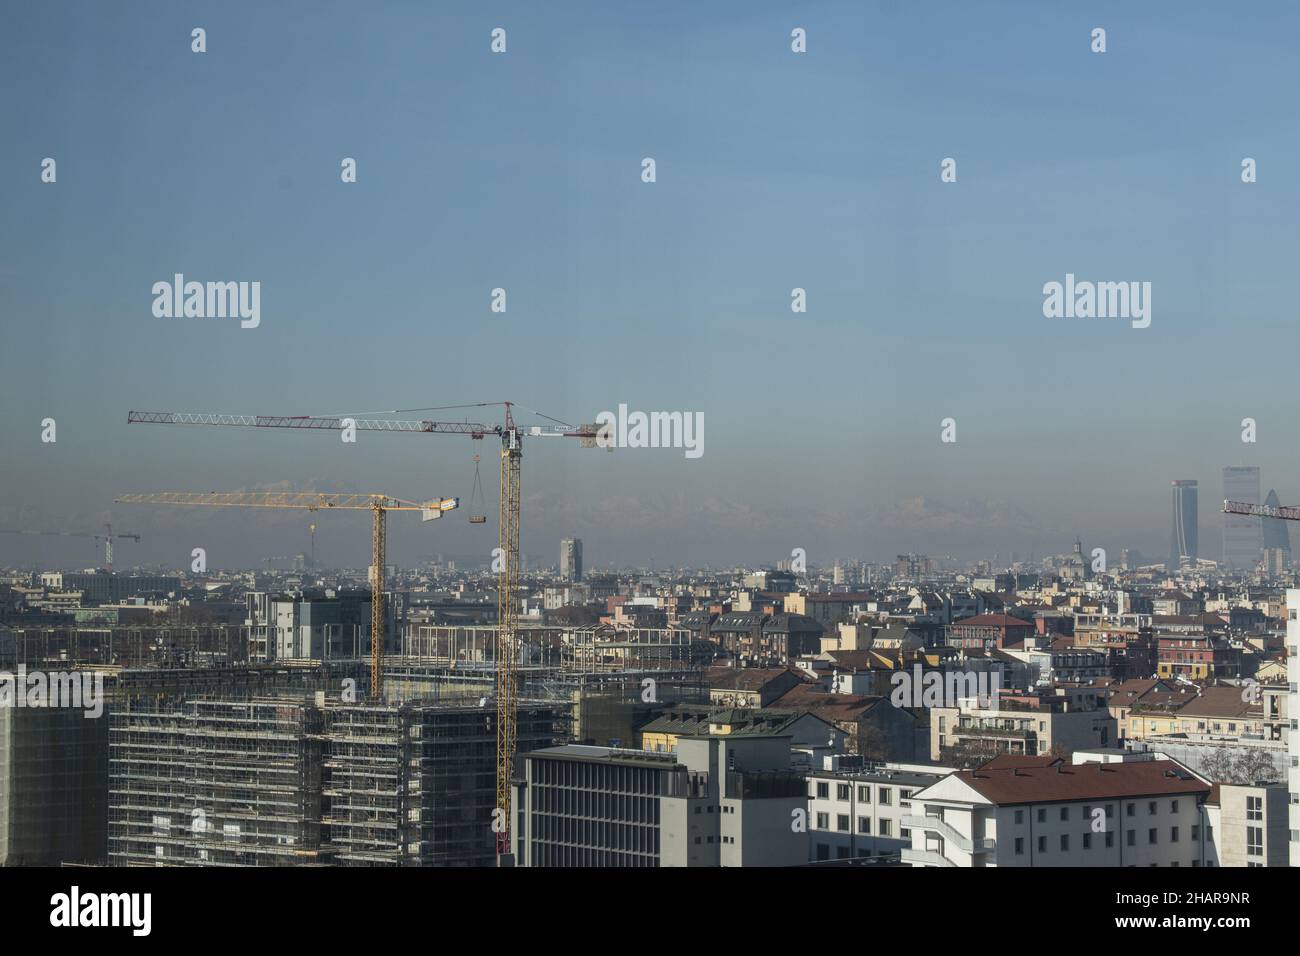 Milan, Italy: The city skyline seen from the windows of the Tower of the Fondazione Prada, the building 60 meters high designed by Rem Koolhaas Stock Photo